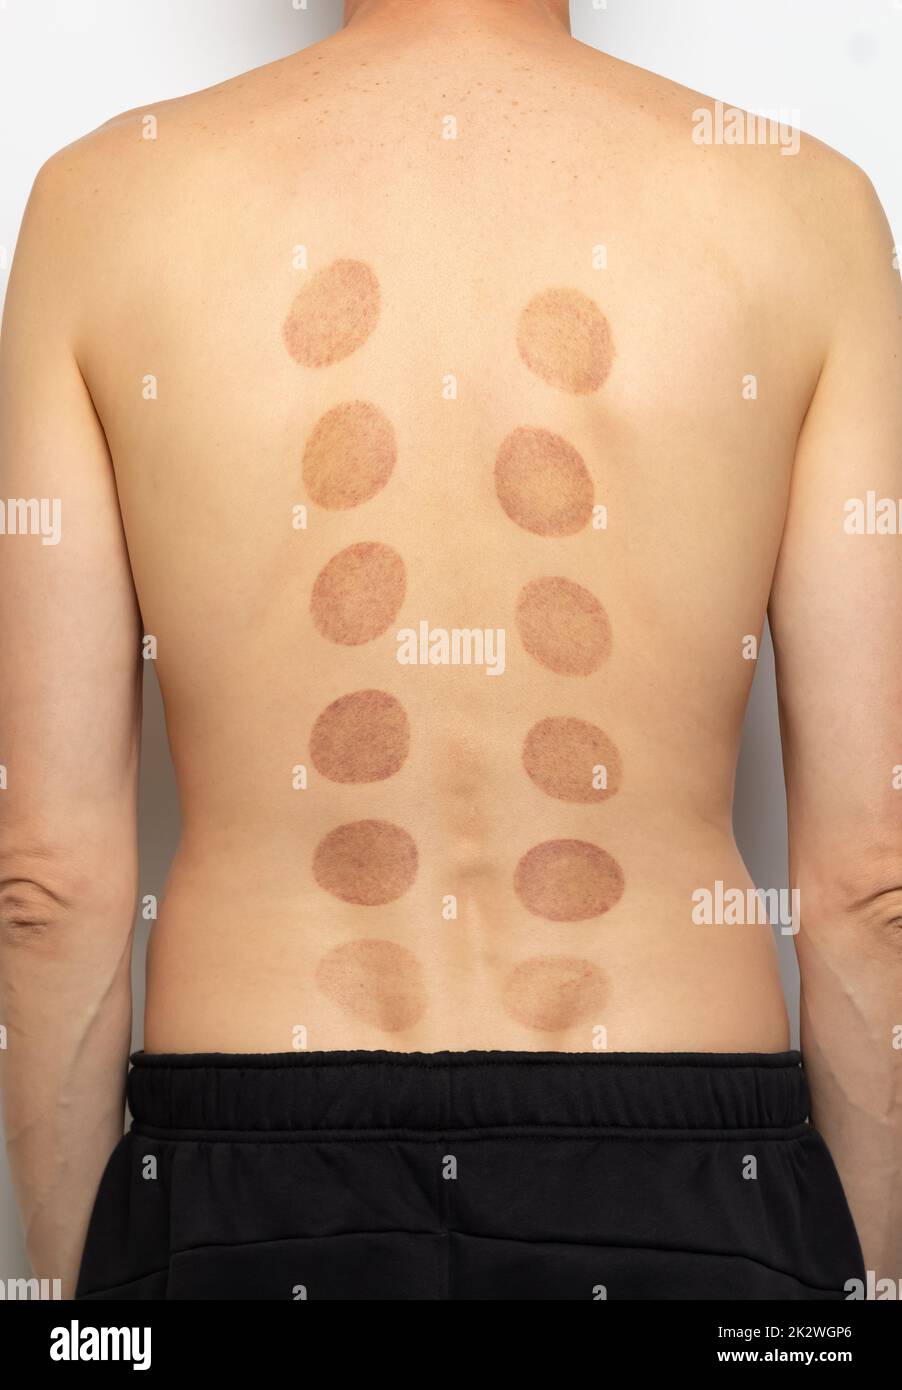 An imprint of a silicone vacuum massage jar on a patient's back. Stock Photo